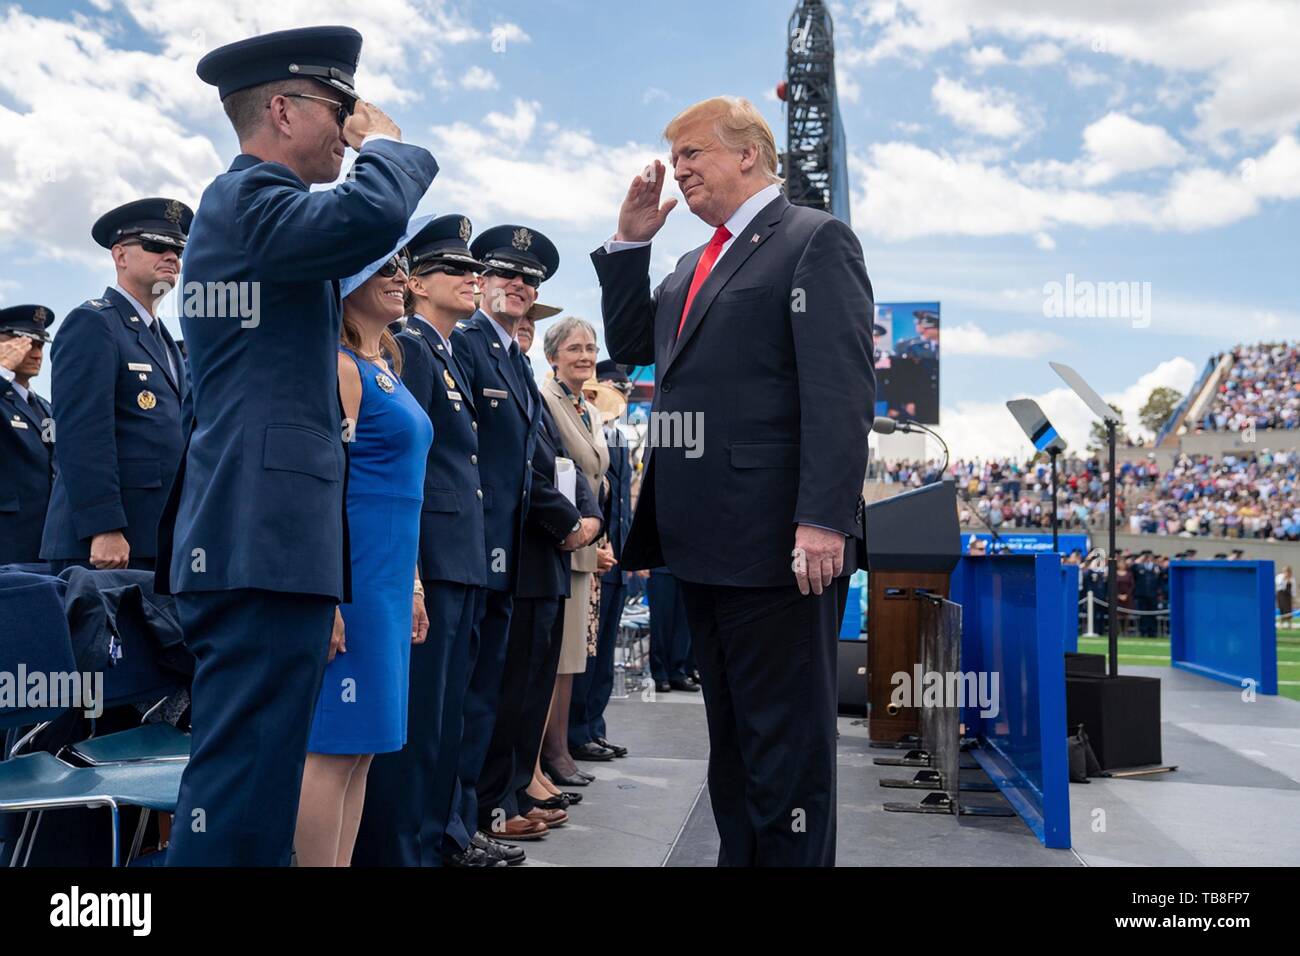 U.S President Donald Trump salutes as he Air Force officers on arrival for the the U.S. Air Force Academy Graduation Ceremony at the USAF Academy Falcon Stadium May 30, 2019 in Colorado Springs, Colorado. Credit: Planetpix/Alamy Live News Stock Photo